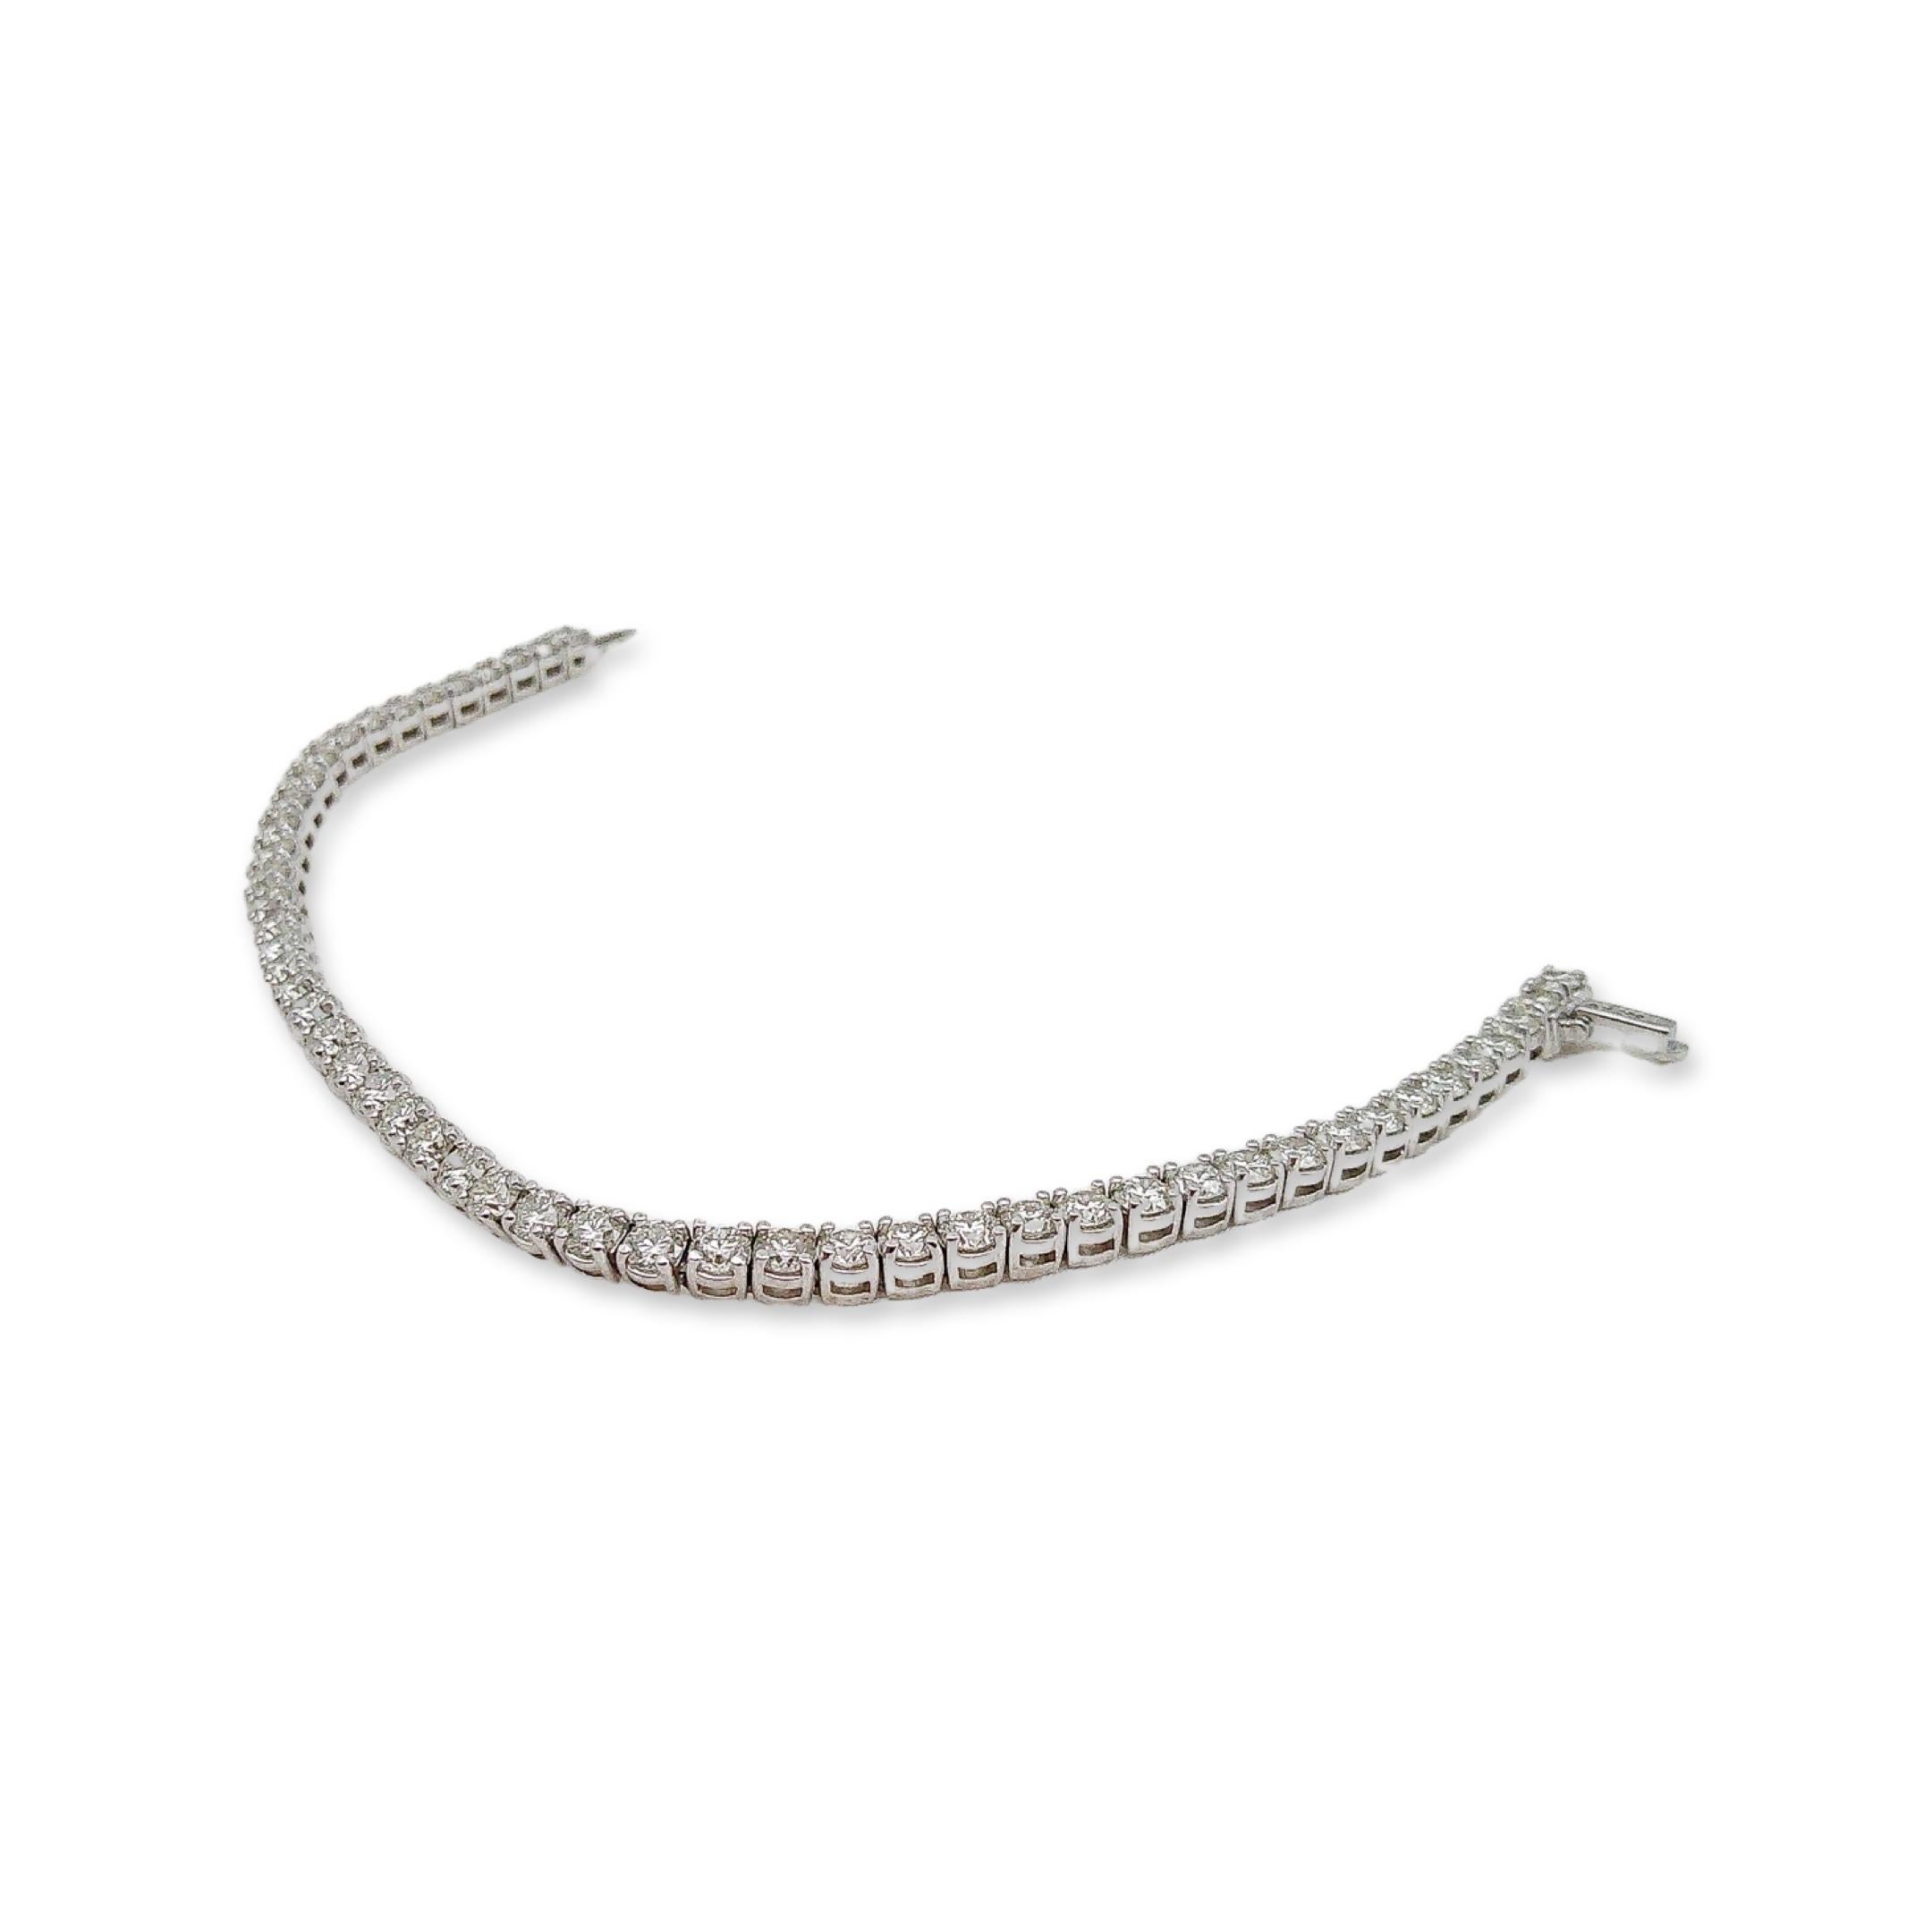 This stunning diamond bracelet is a contemporary piece and has yet to be worn. The setting is 14K white gold and features an astounding 6.5 carats of sparkling round diamonds. Often referred to as a “Tennis” bracelet, the contemporary diamond